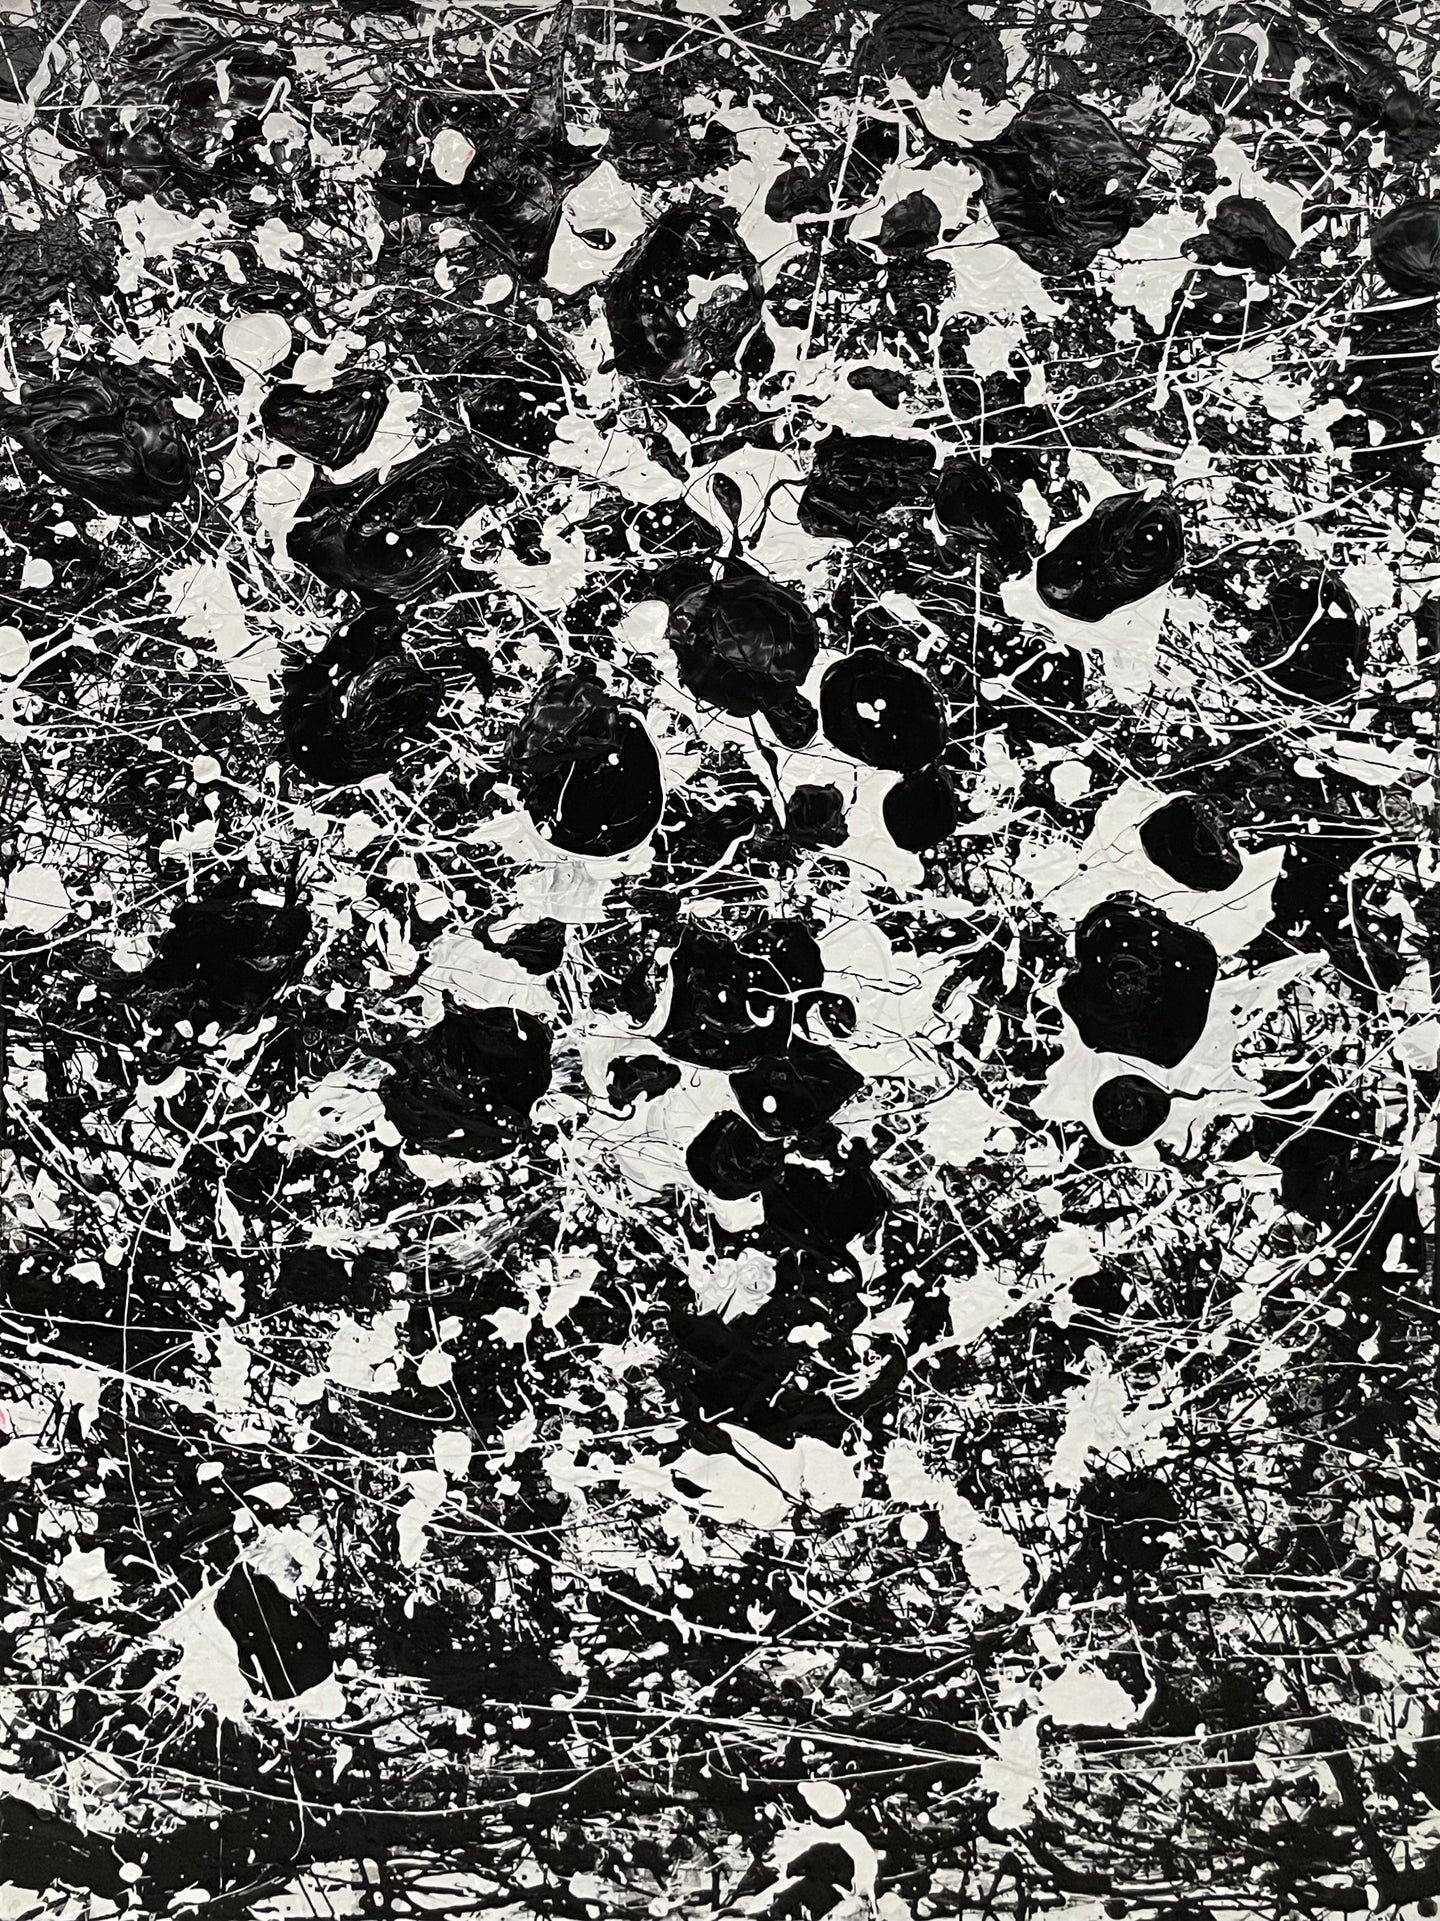 J. Steven Manolis, Black & White, 40.30.01, Large Black and White Wall Art, Abstract expressionism paintings for sale at Manolis Projects Art Gallery, Miami, Fl